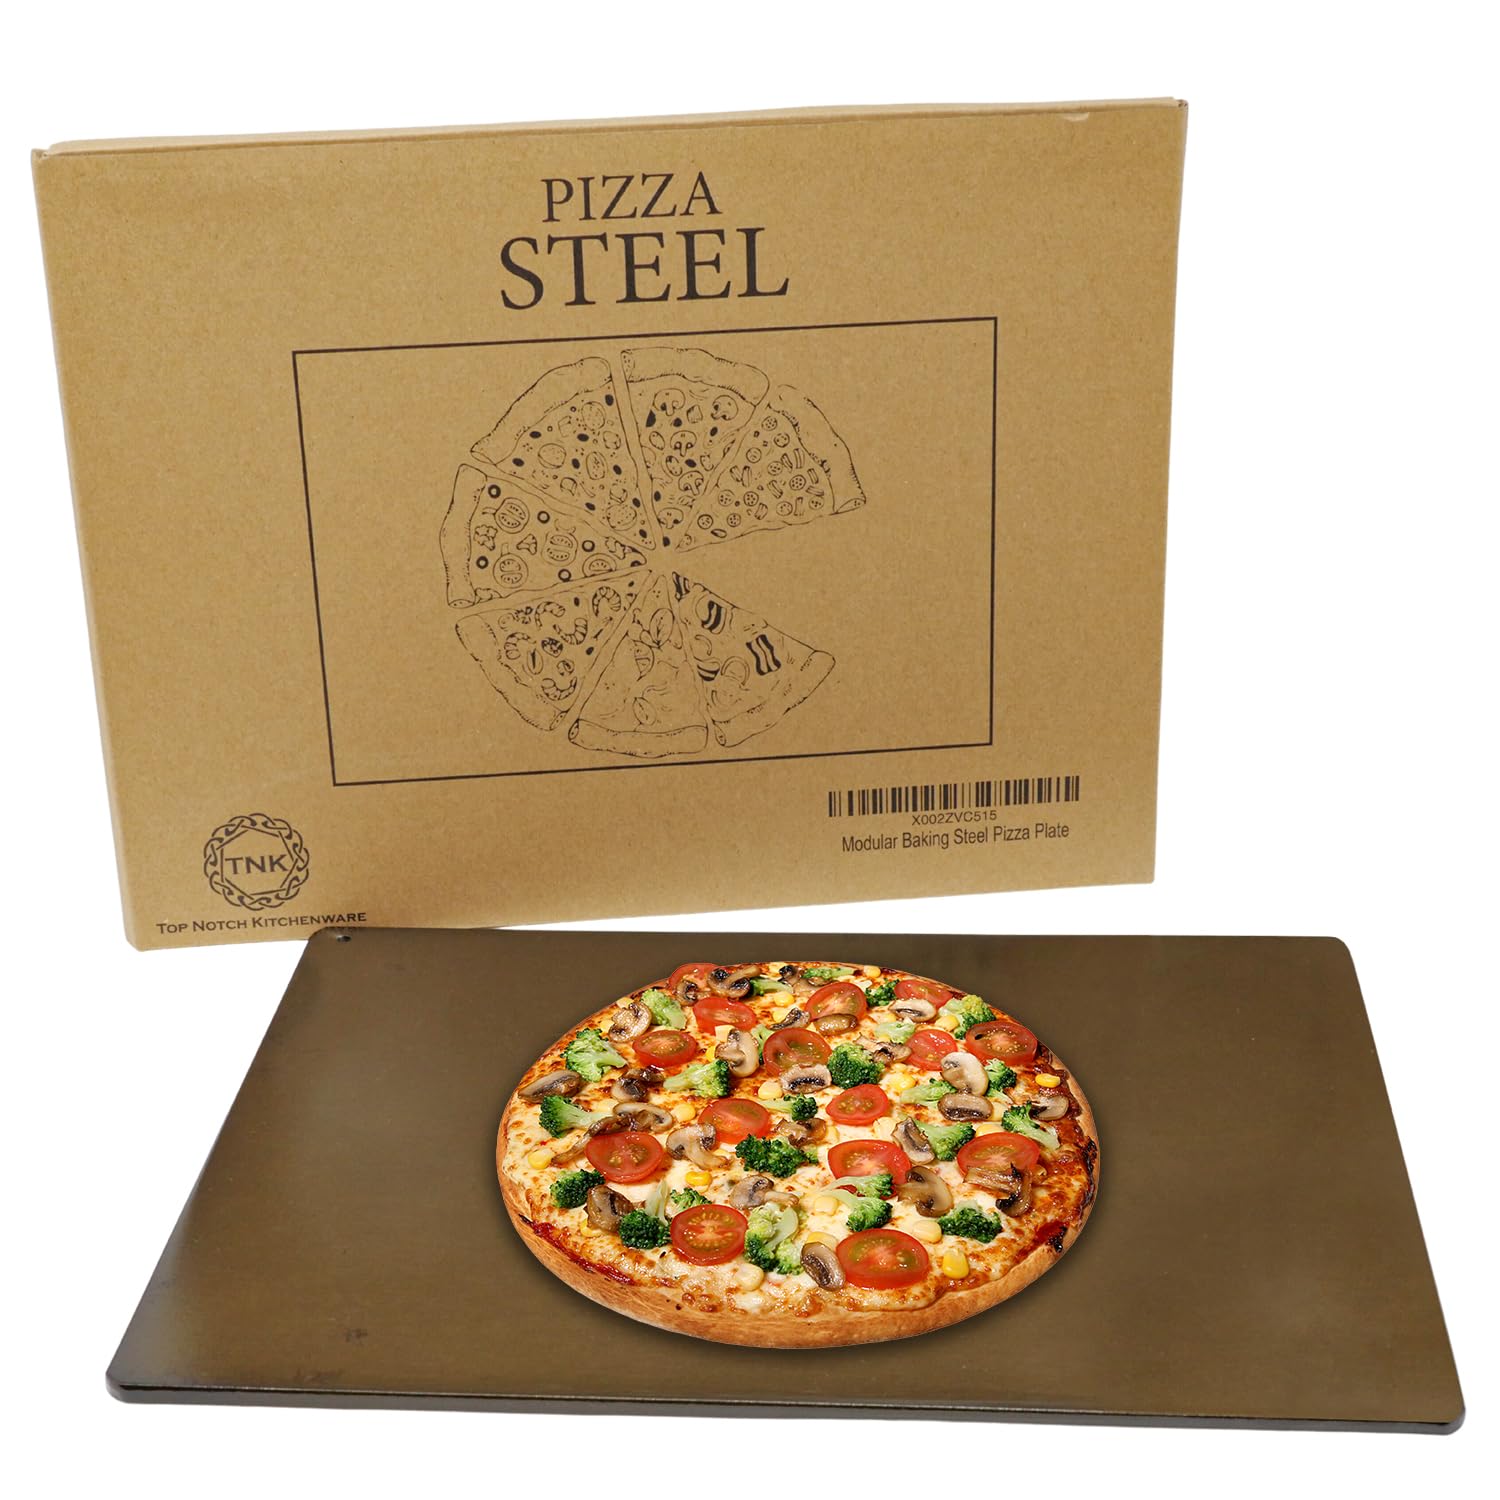 Premium Pizza Stone for Oven | Small But Expandable By Purchasing Two or More | Perfect Crispy Crusts | Durable Pizza Steel Stone | Deluxe Pizza Stone Offering Easier Cleaning, Handling and Storage